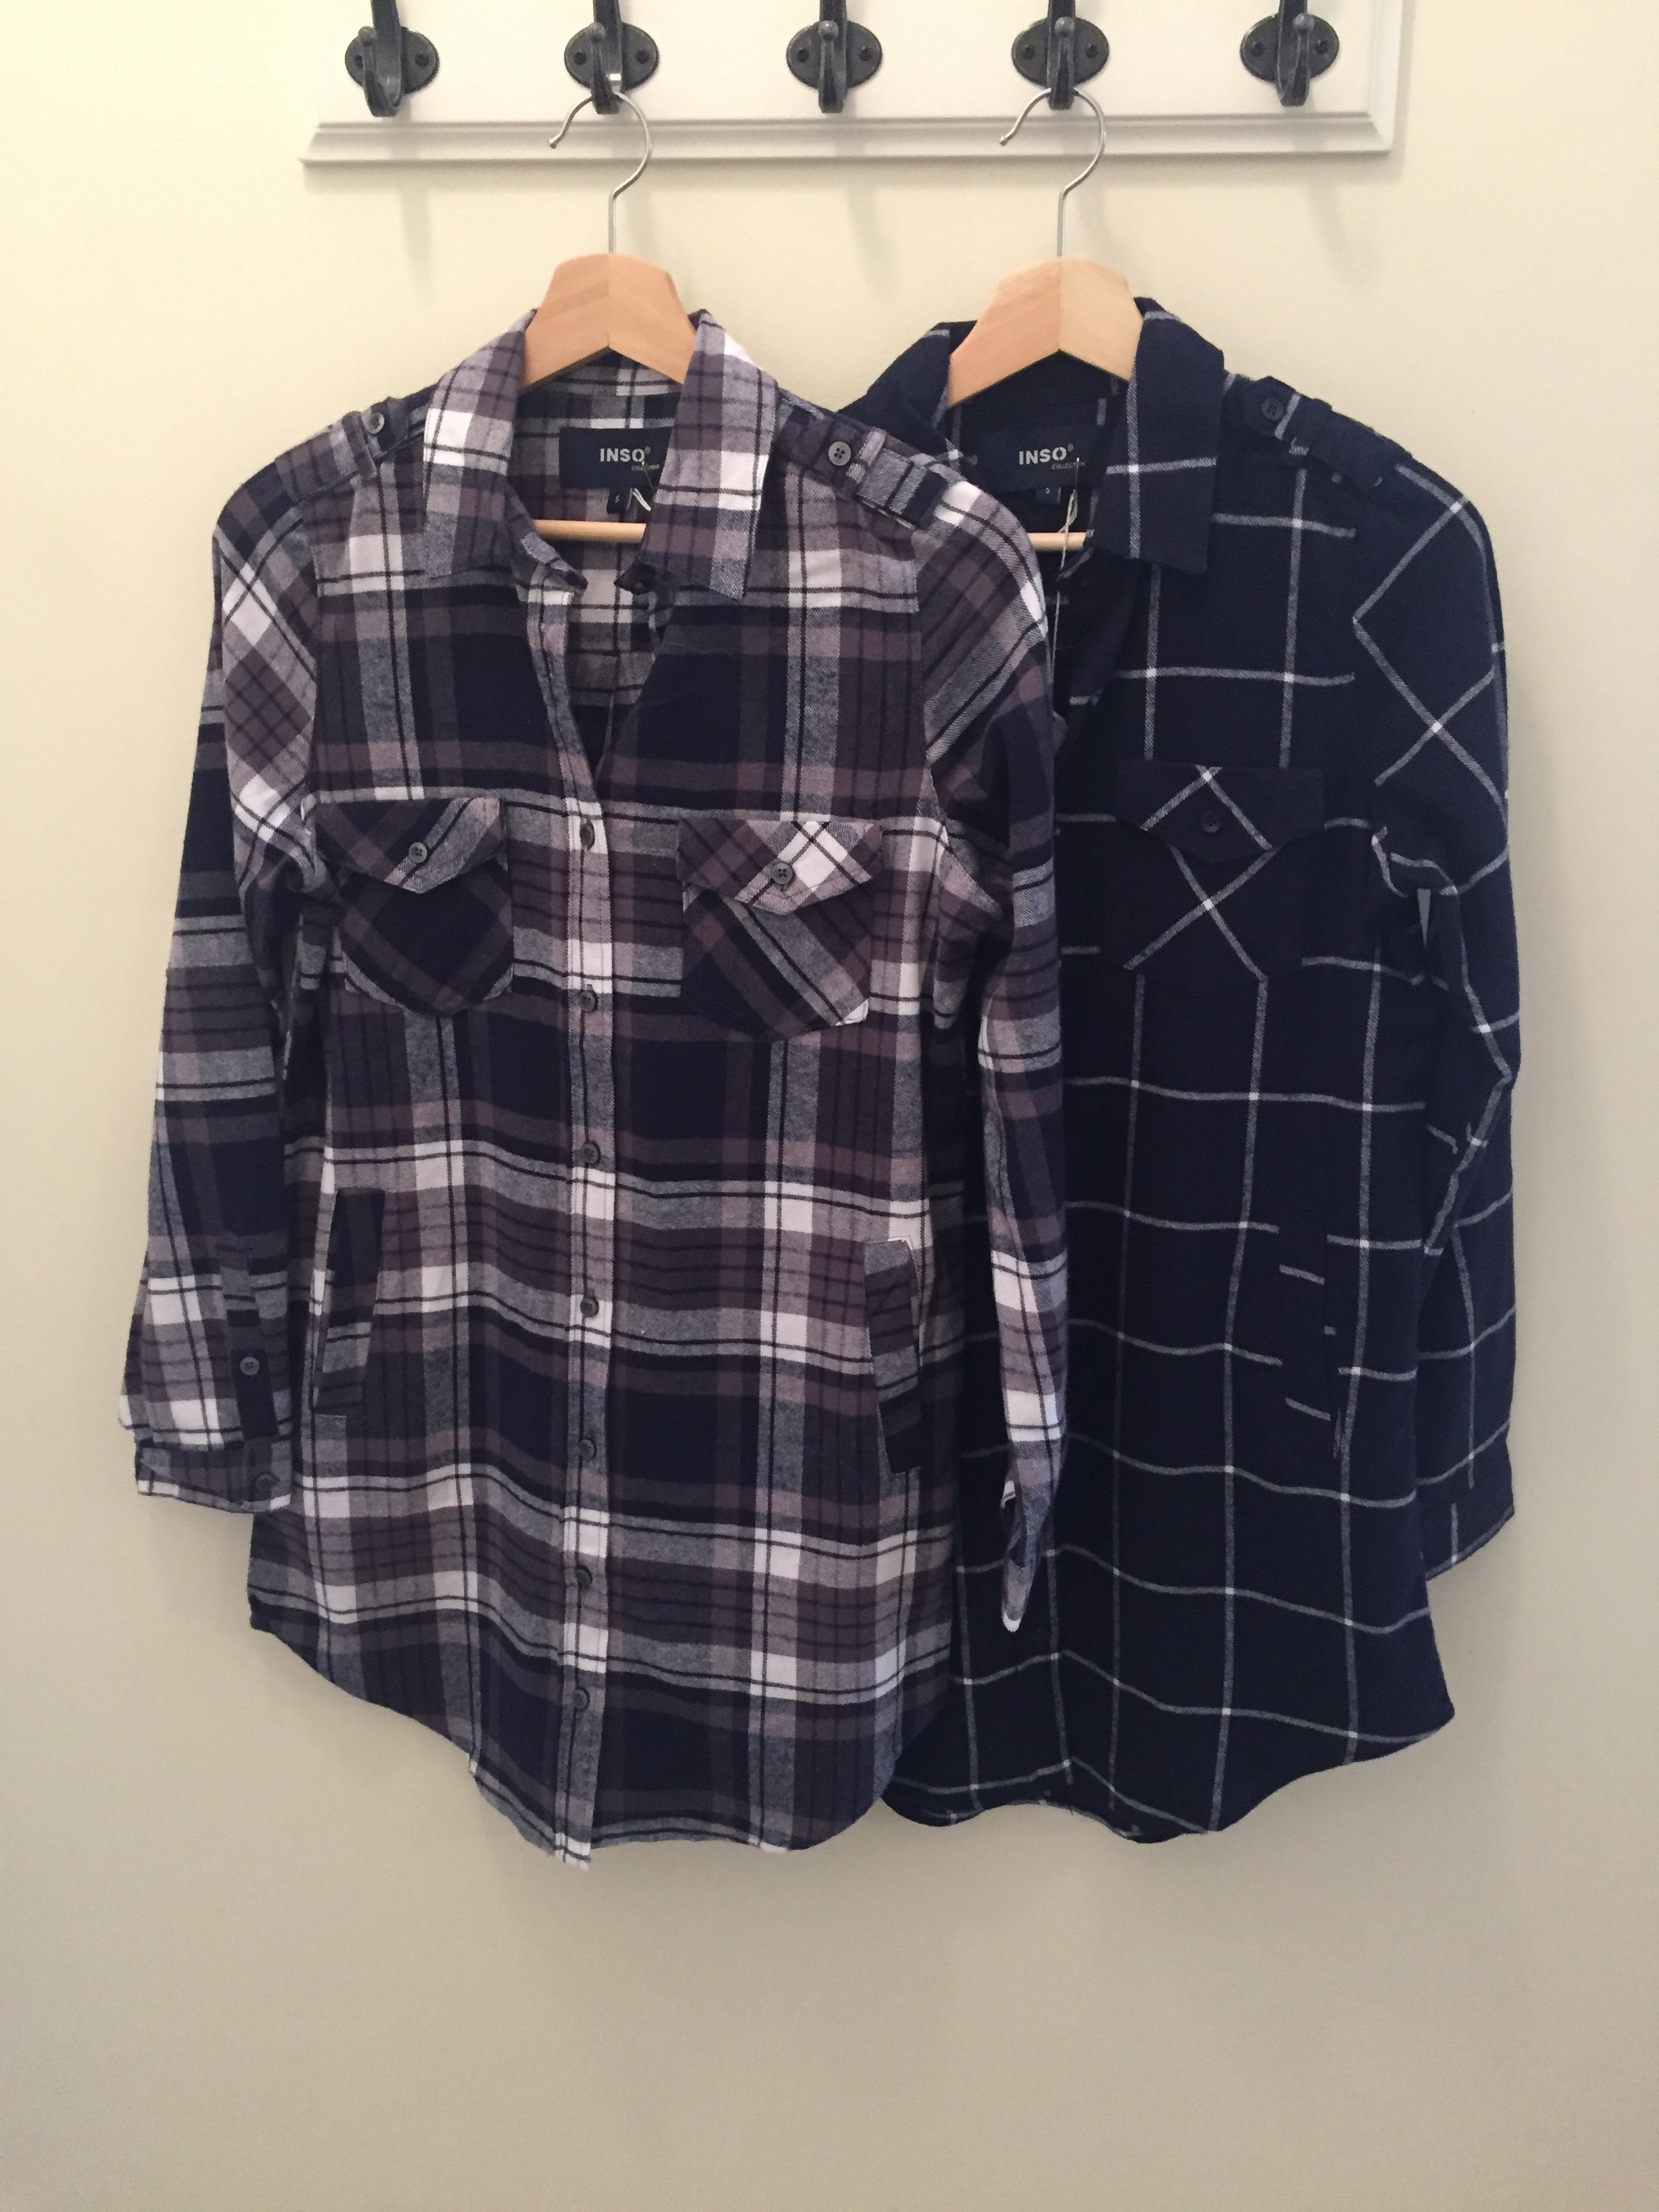 Tunic Flannel, with Pockets! $32